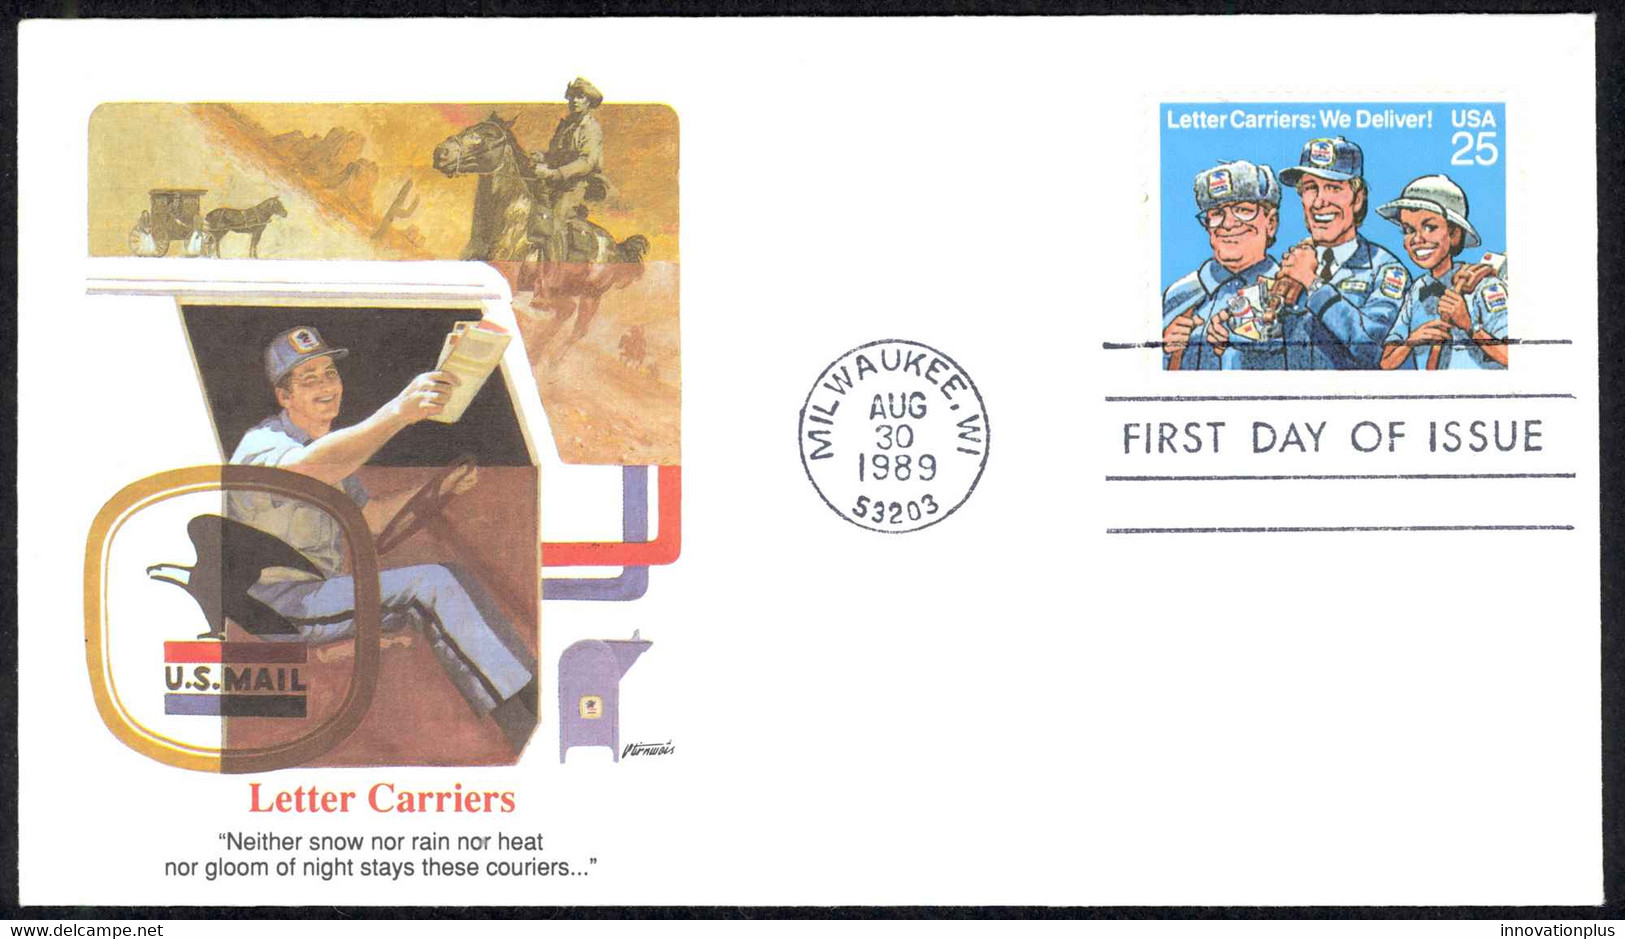 USA Sc# 2420 (Fleetwood) FDC (a) (Milwaukee, WI) 1989 8.30 Letter Carriers - 1981-1990